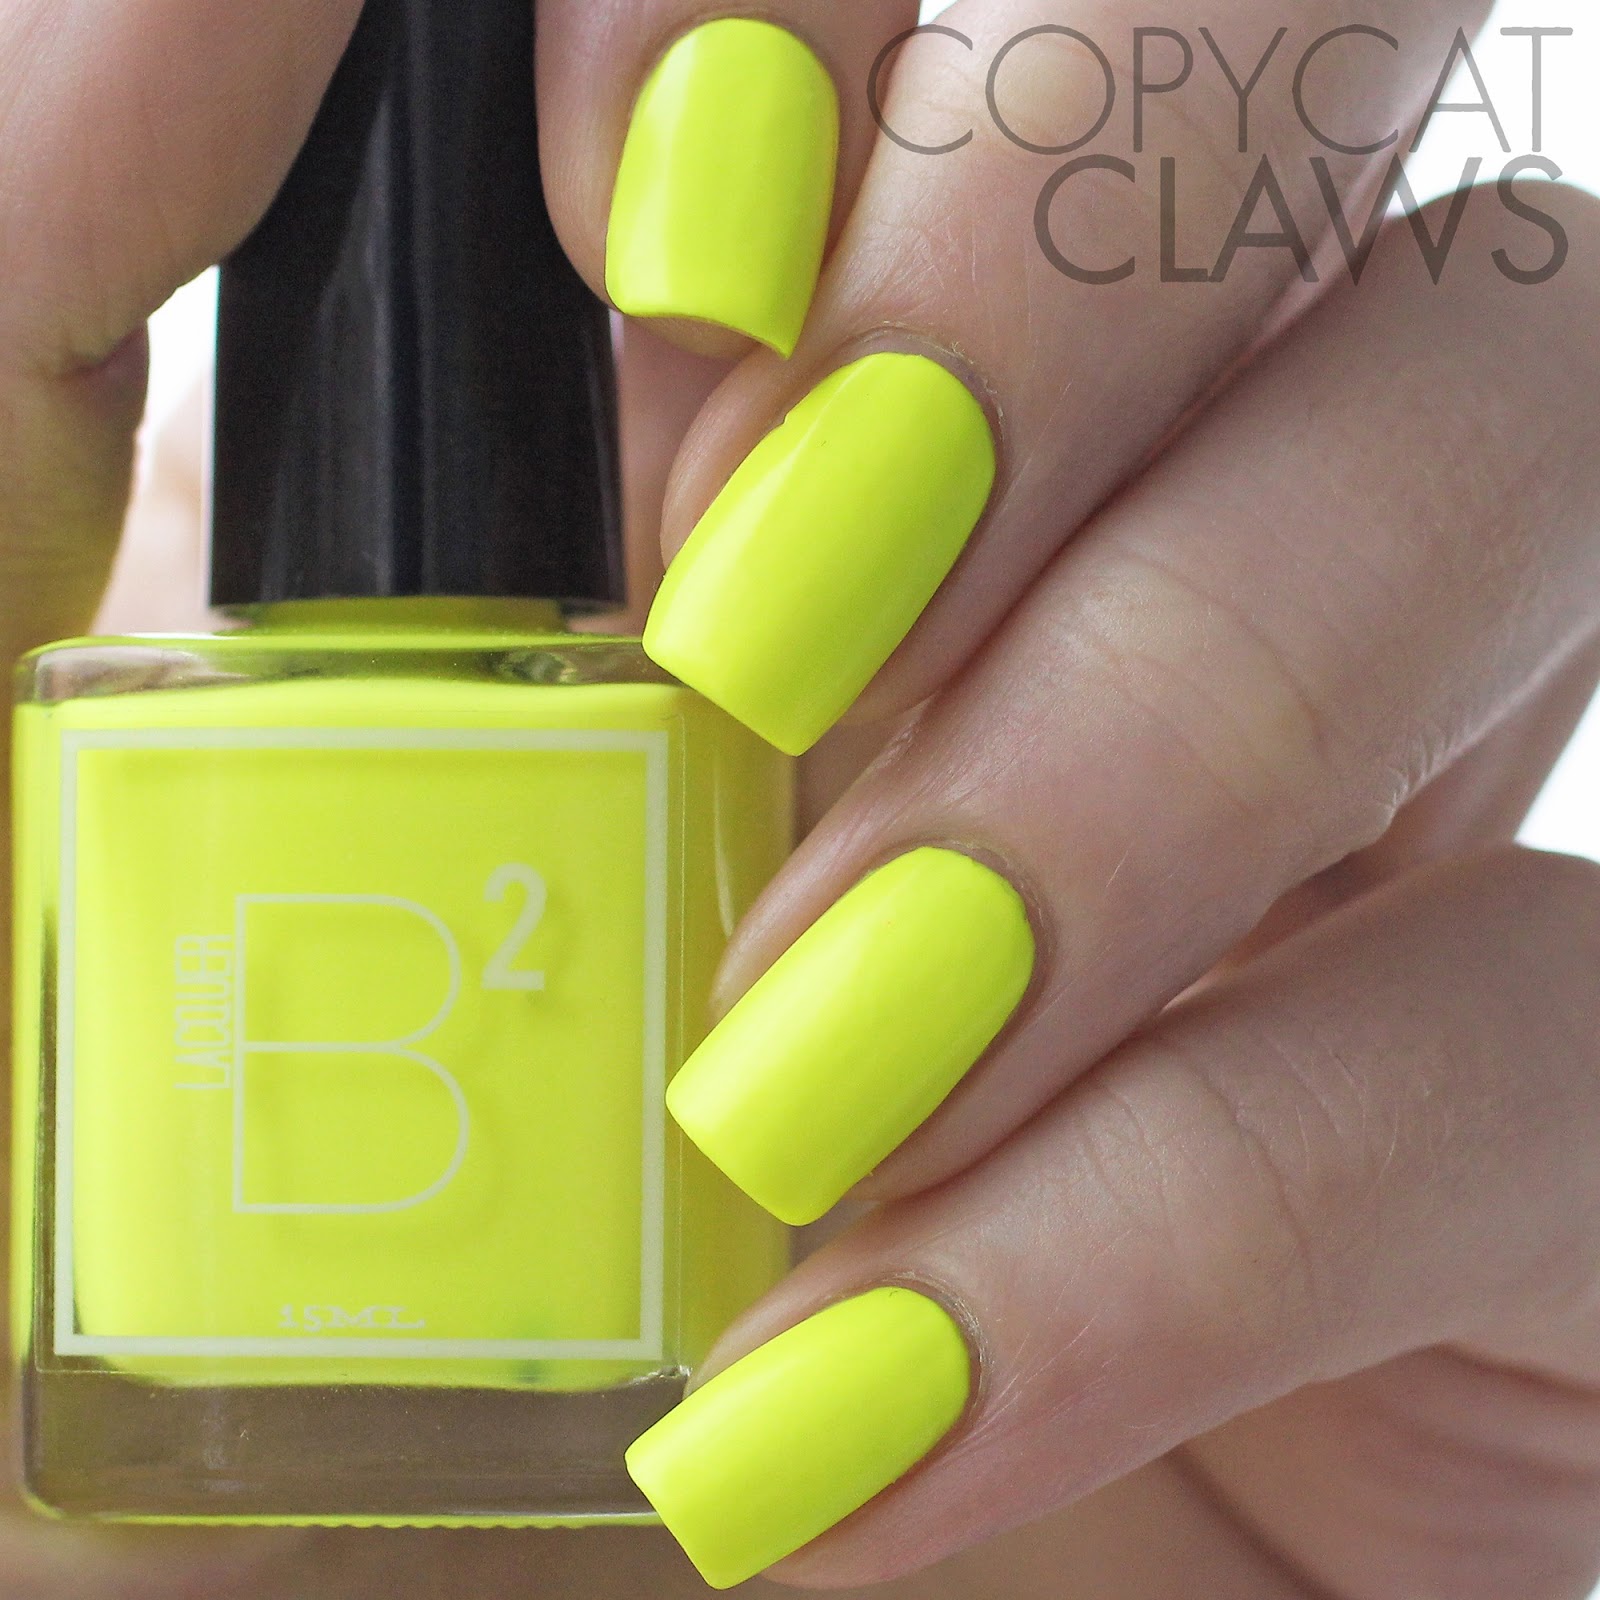 Copycat Claws: B Squared Lacquer EDM Collex Swatches